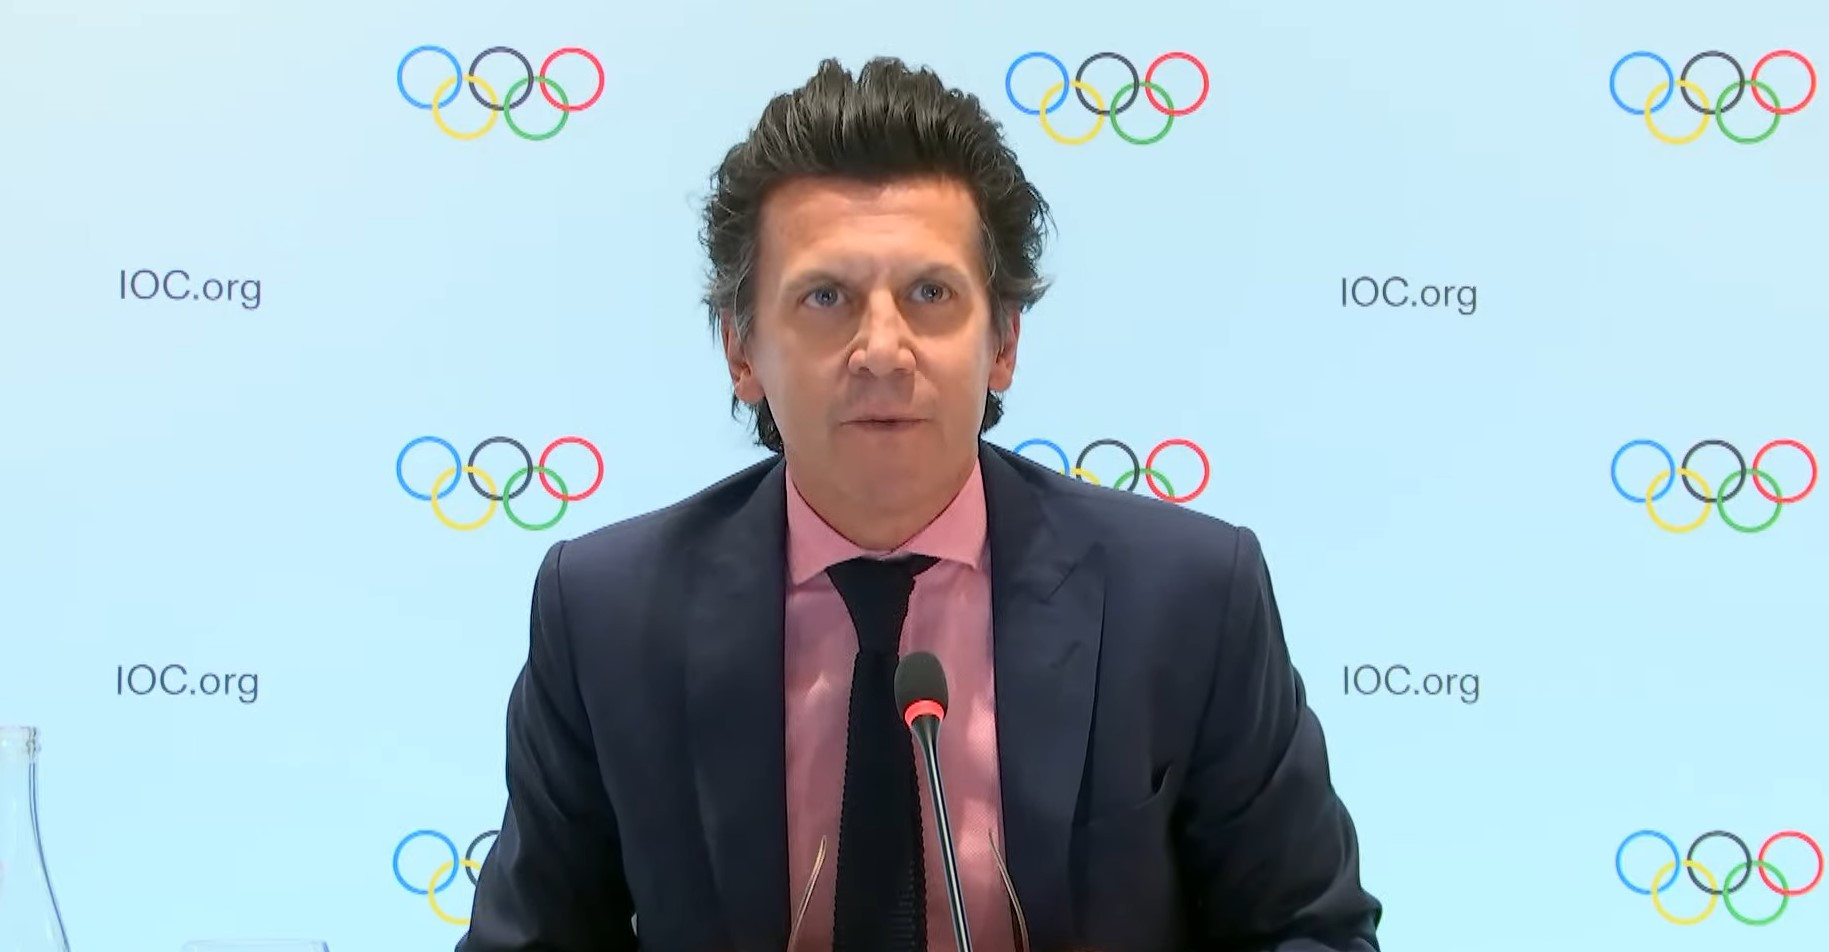 IOC Executive Board Olympic Games executive director Christophe Dubi said "transparency and cooperation" were important in situations like this ©Getty Images